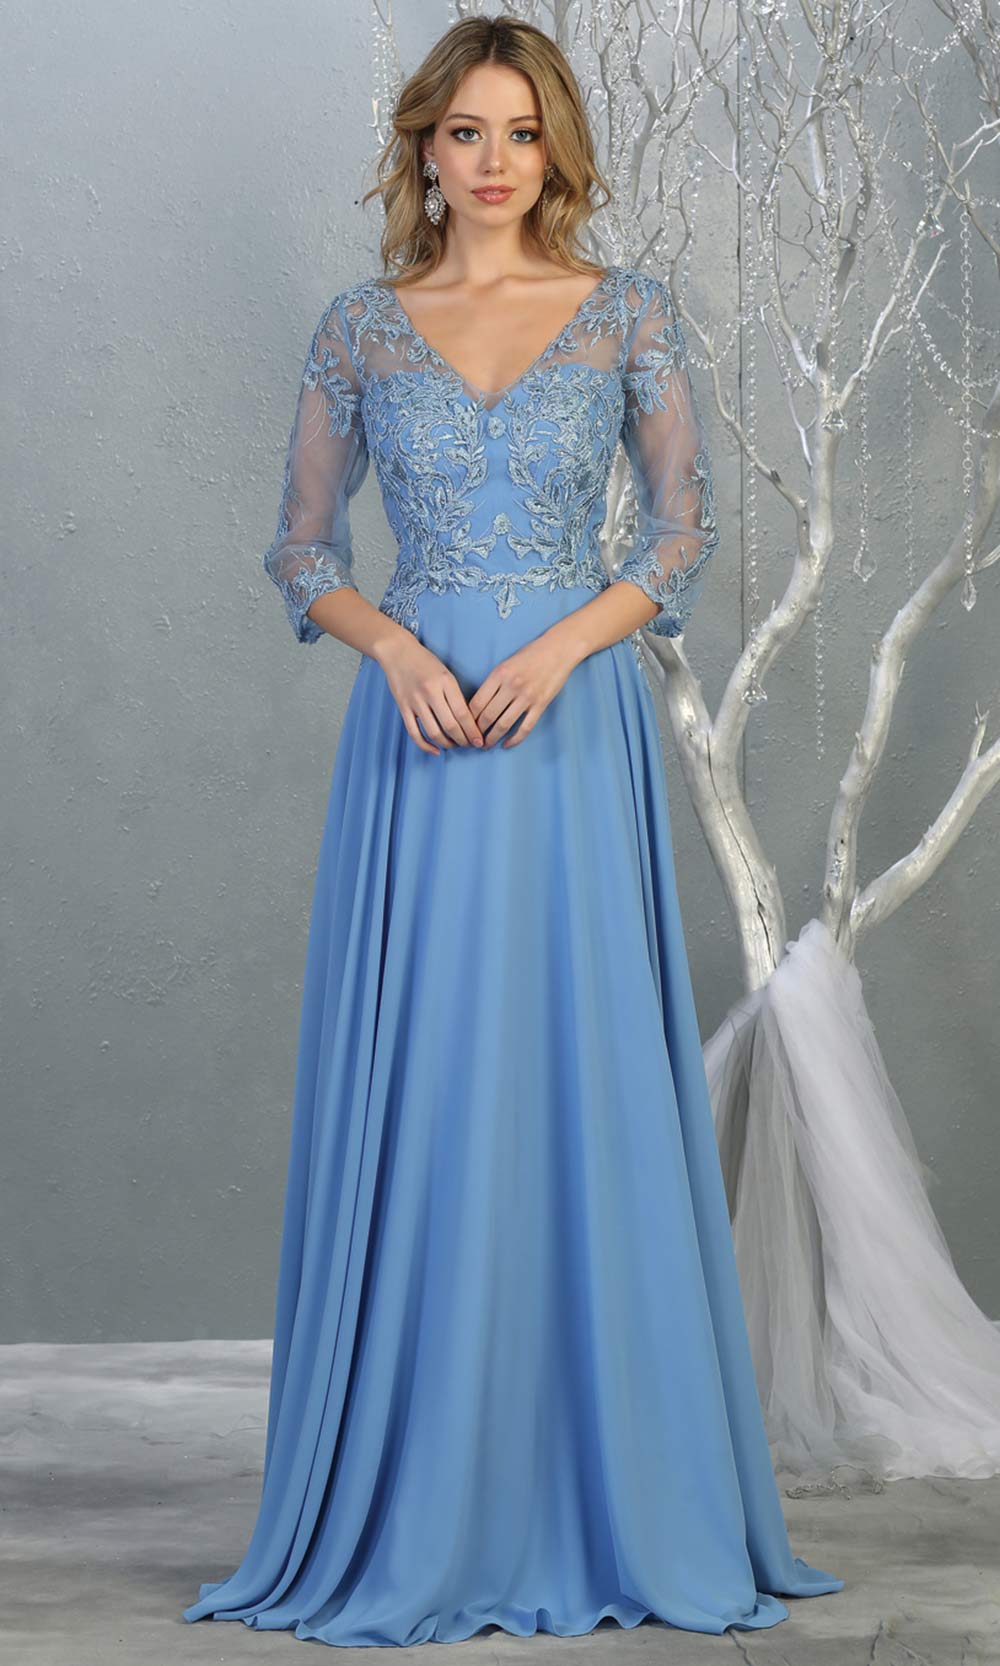 Mayqueen RQ7820 long perry blue modest flowy dress w/ long sleeves. Light blue chiffon & lace top is perfect for  mother of the bride, formal wedding guest, indowestern gown, evening party dress, perry blue muslim party dress. Plus sizes avail.jpg